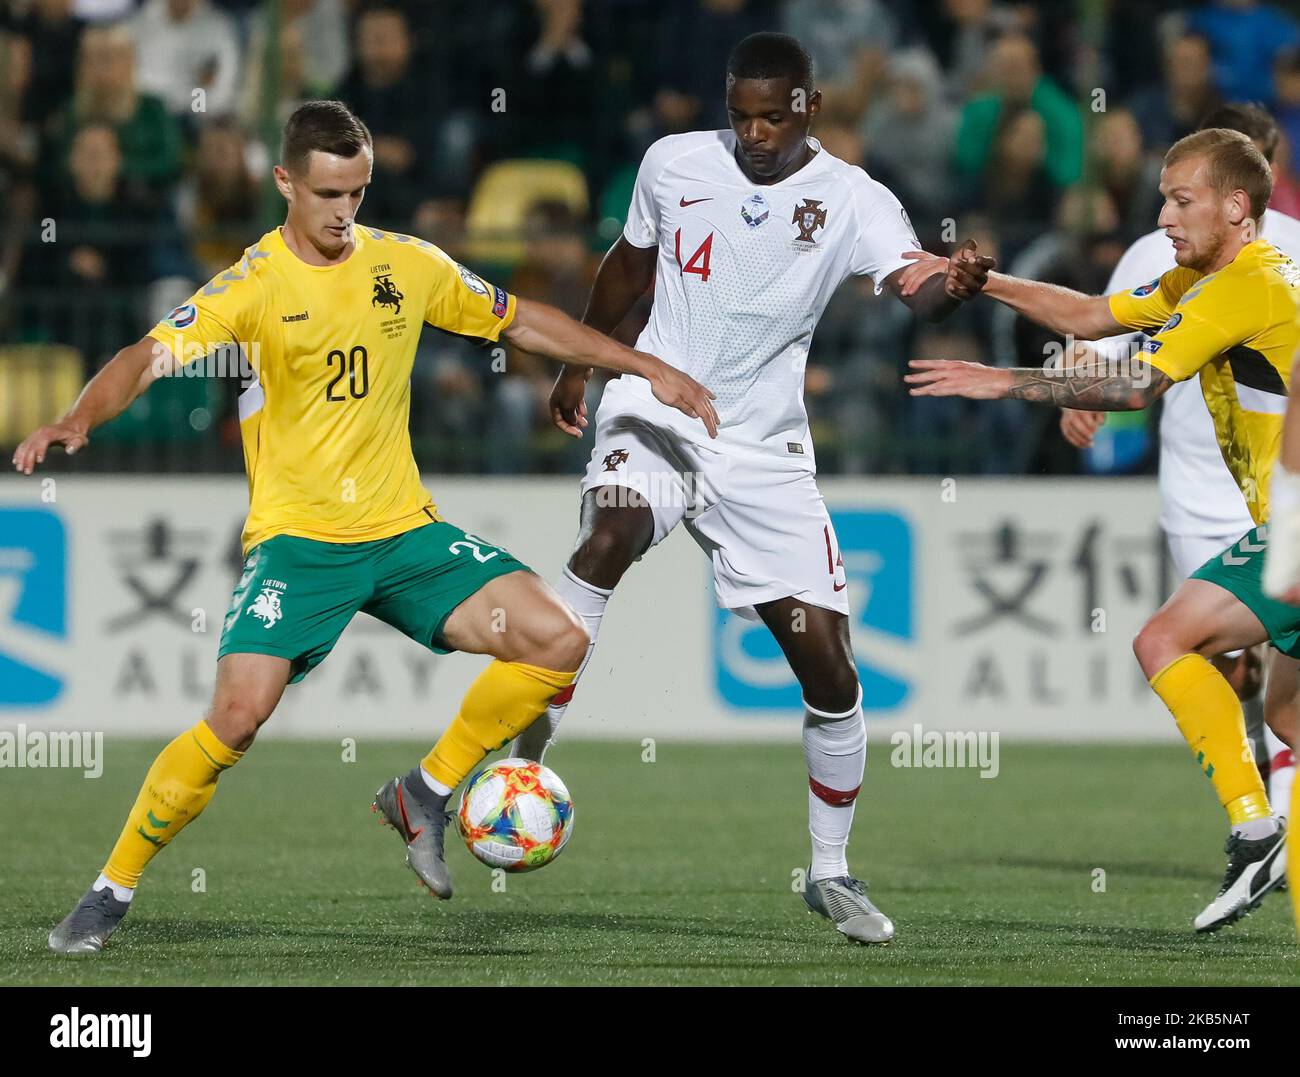 Deimantas Petravicius (L) and Modestas Vorobjovas (R) of Lithuania vie for the ball with William Carvalho of Portugal during the UEFA Euro 2020 qualifying match between Lithuanua and Portugal on September 10, 2019 at LFF Stadium in Vilnius, Lithuania. (Photo by Mike Kireev/NurPhoto) Stock Photo